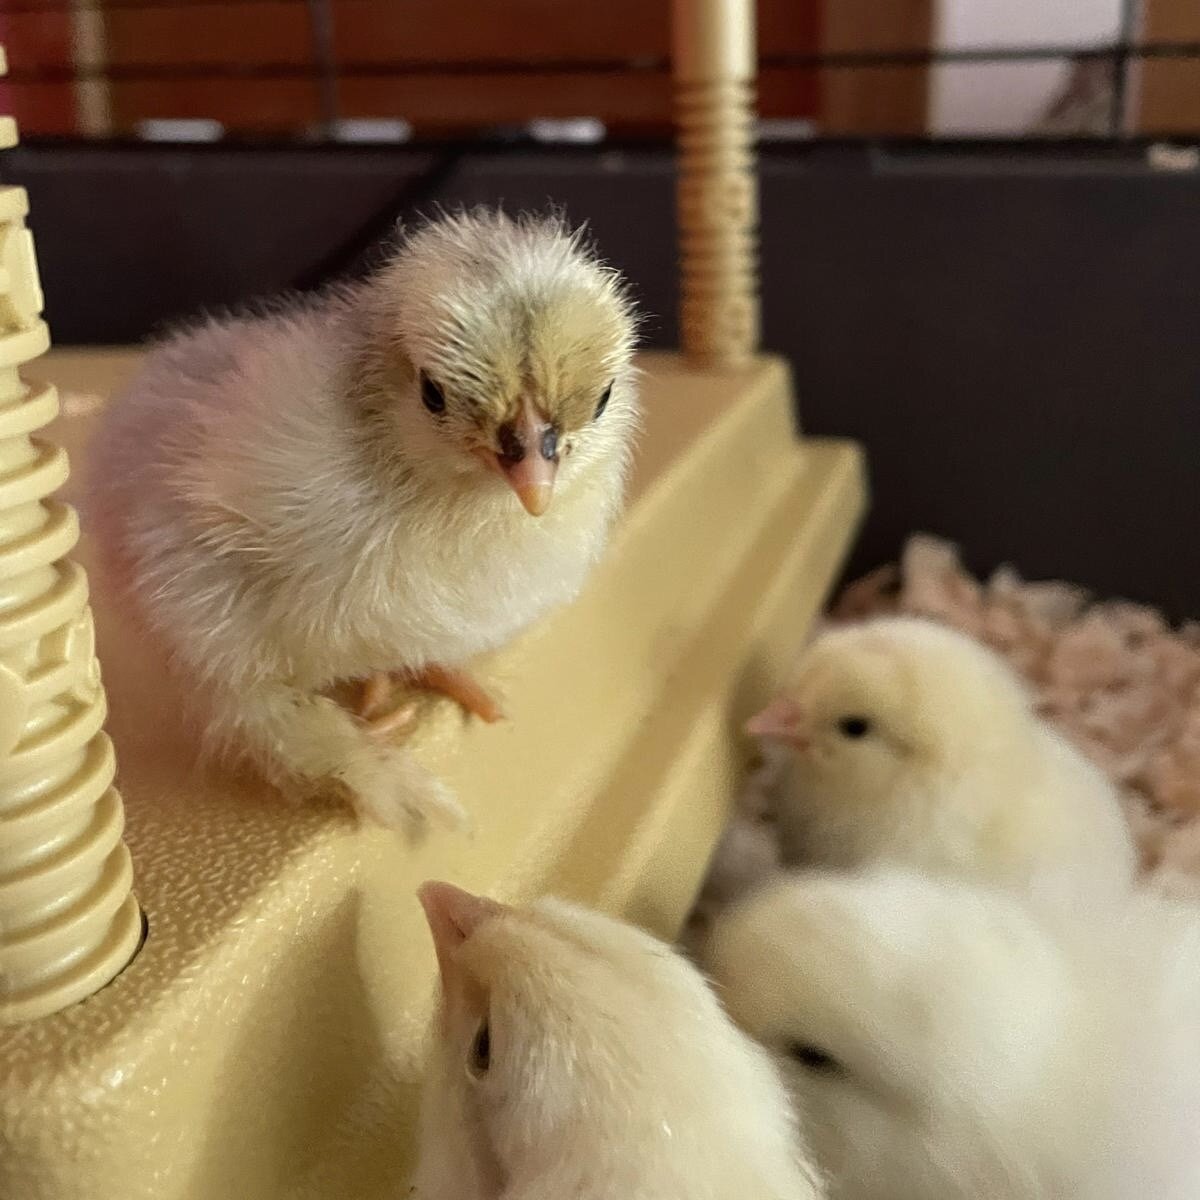 Our chicks have hatched🐣

If you've booked our Easter Eggstravaganza, you'll get to hold these little chicks in your session* Tag a friend that would LOVE to meet these🤩

Don't miss out, book your tickets now by clicking the link in our bio🐰

*Ple